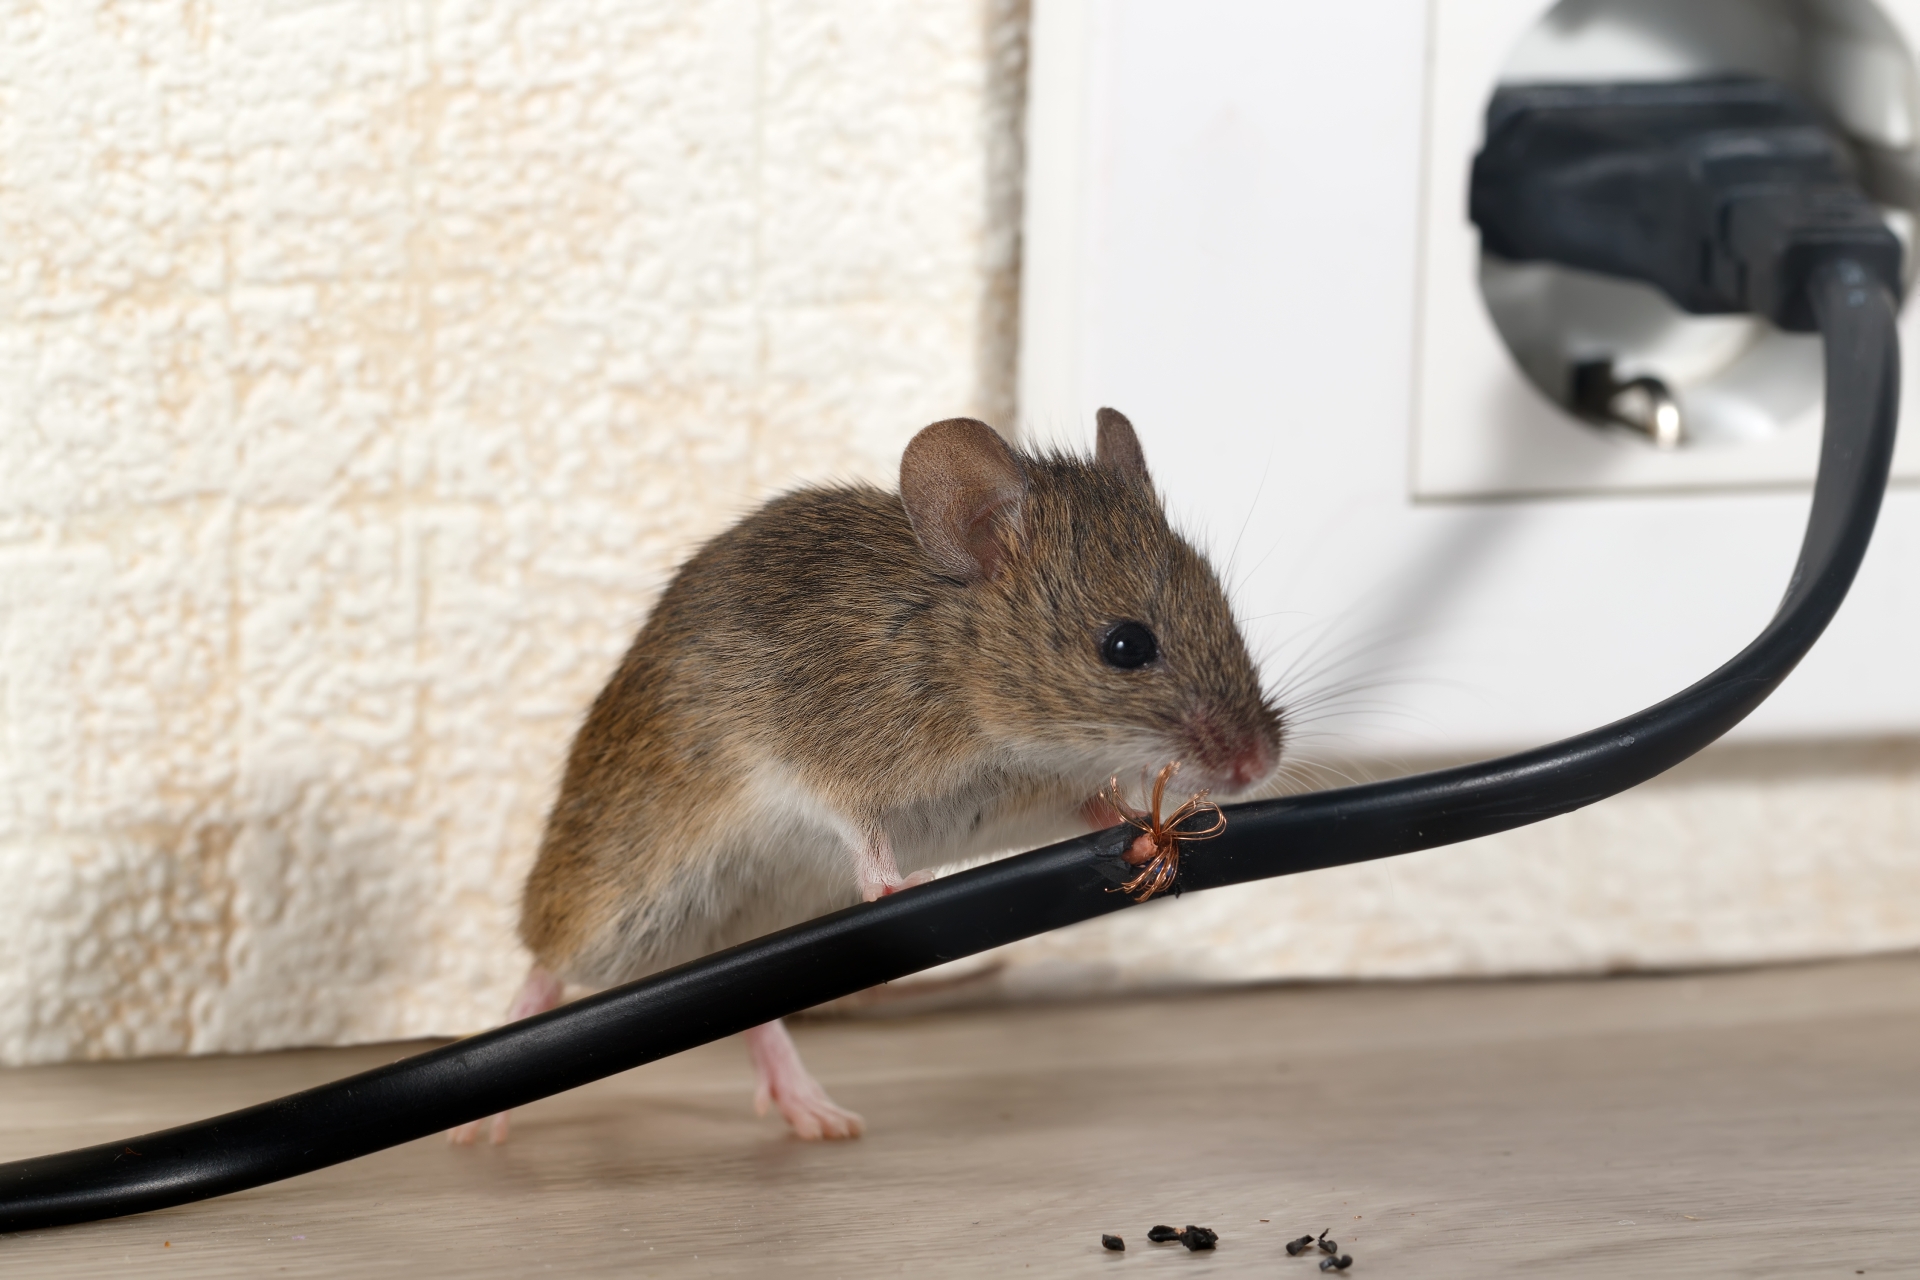 Mice Infestation, Pest Control in Finchley Central, N3. Call Now 020 8166 9746